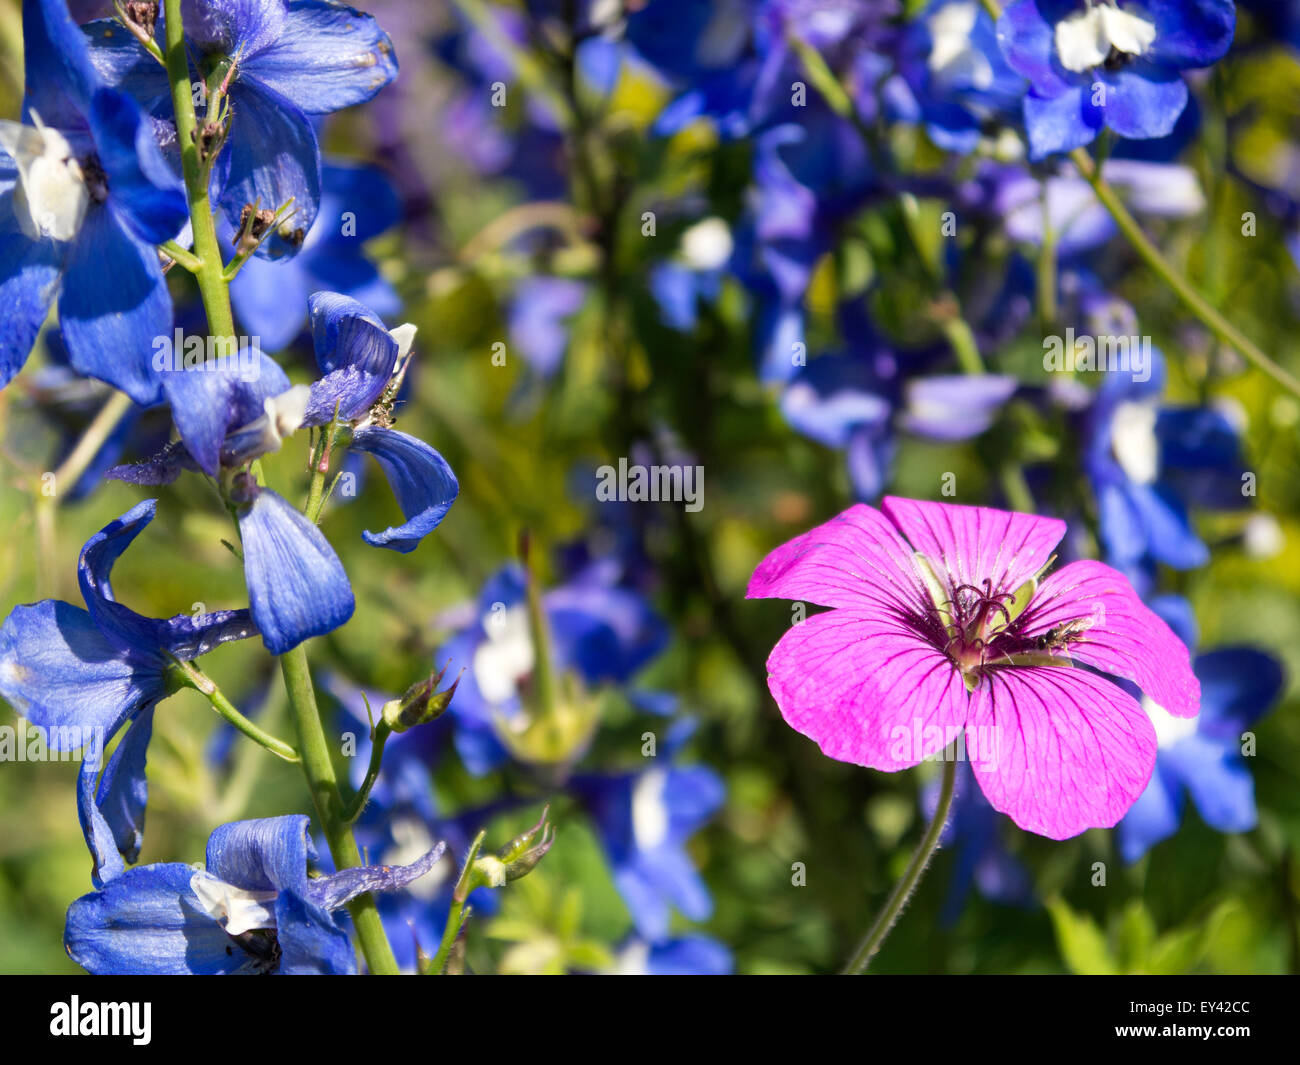 Pink flower surrounded by blue flowers Stock Photo